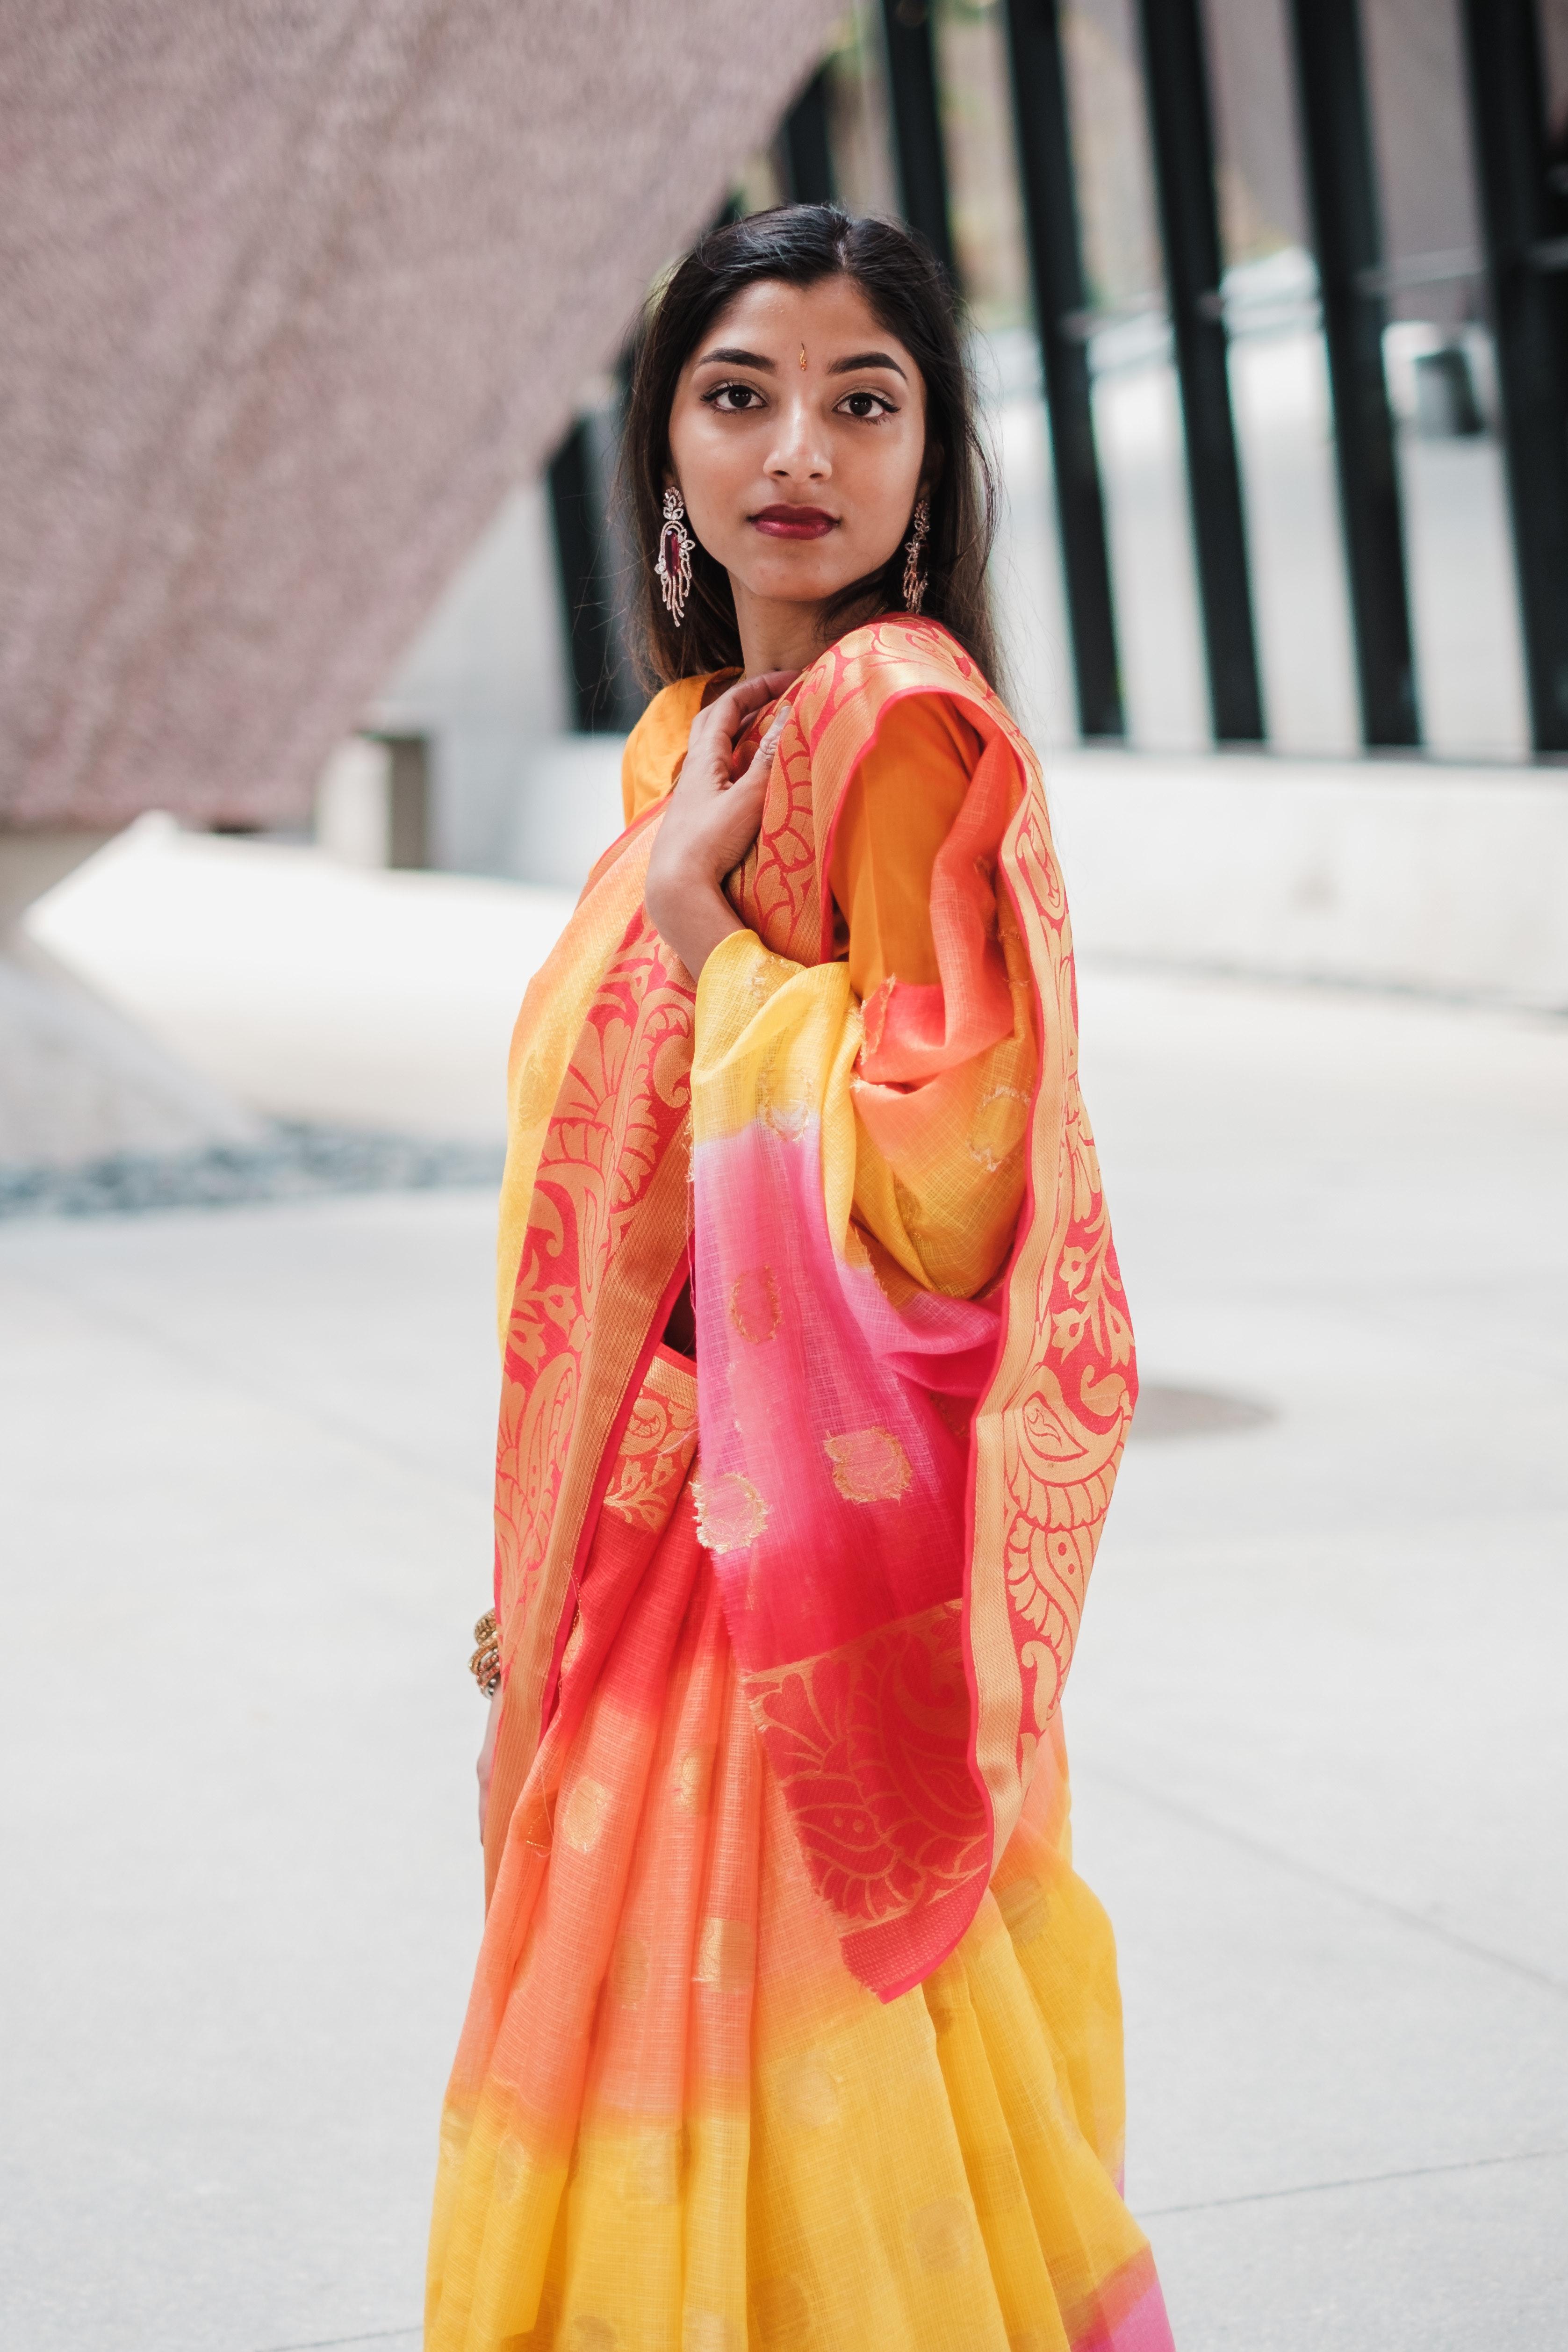 how to start indian clothing business in usa